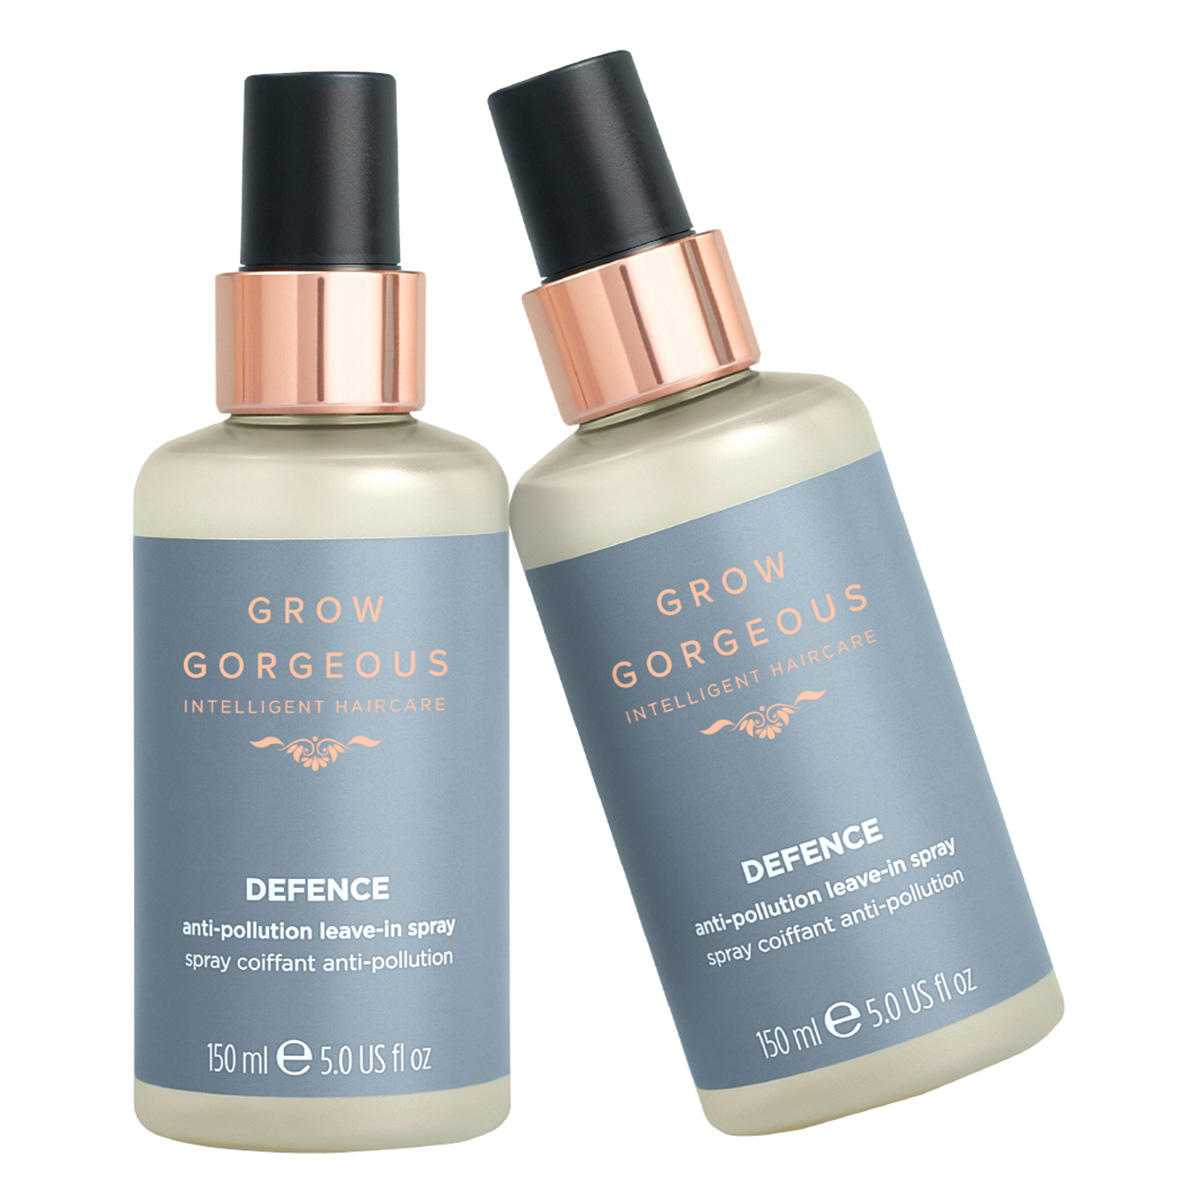 GROW GORGEOUS Defence Anti-Pollution Leave-In Spray 150 ml - 2